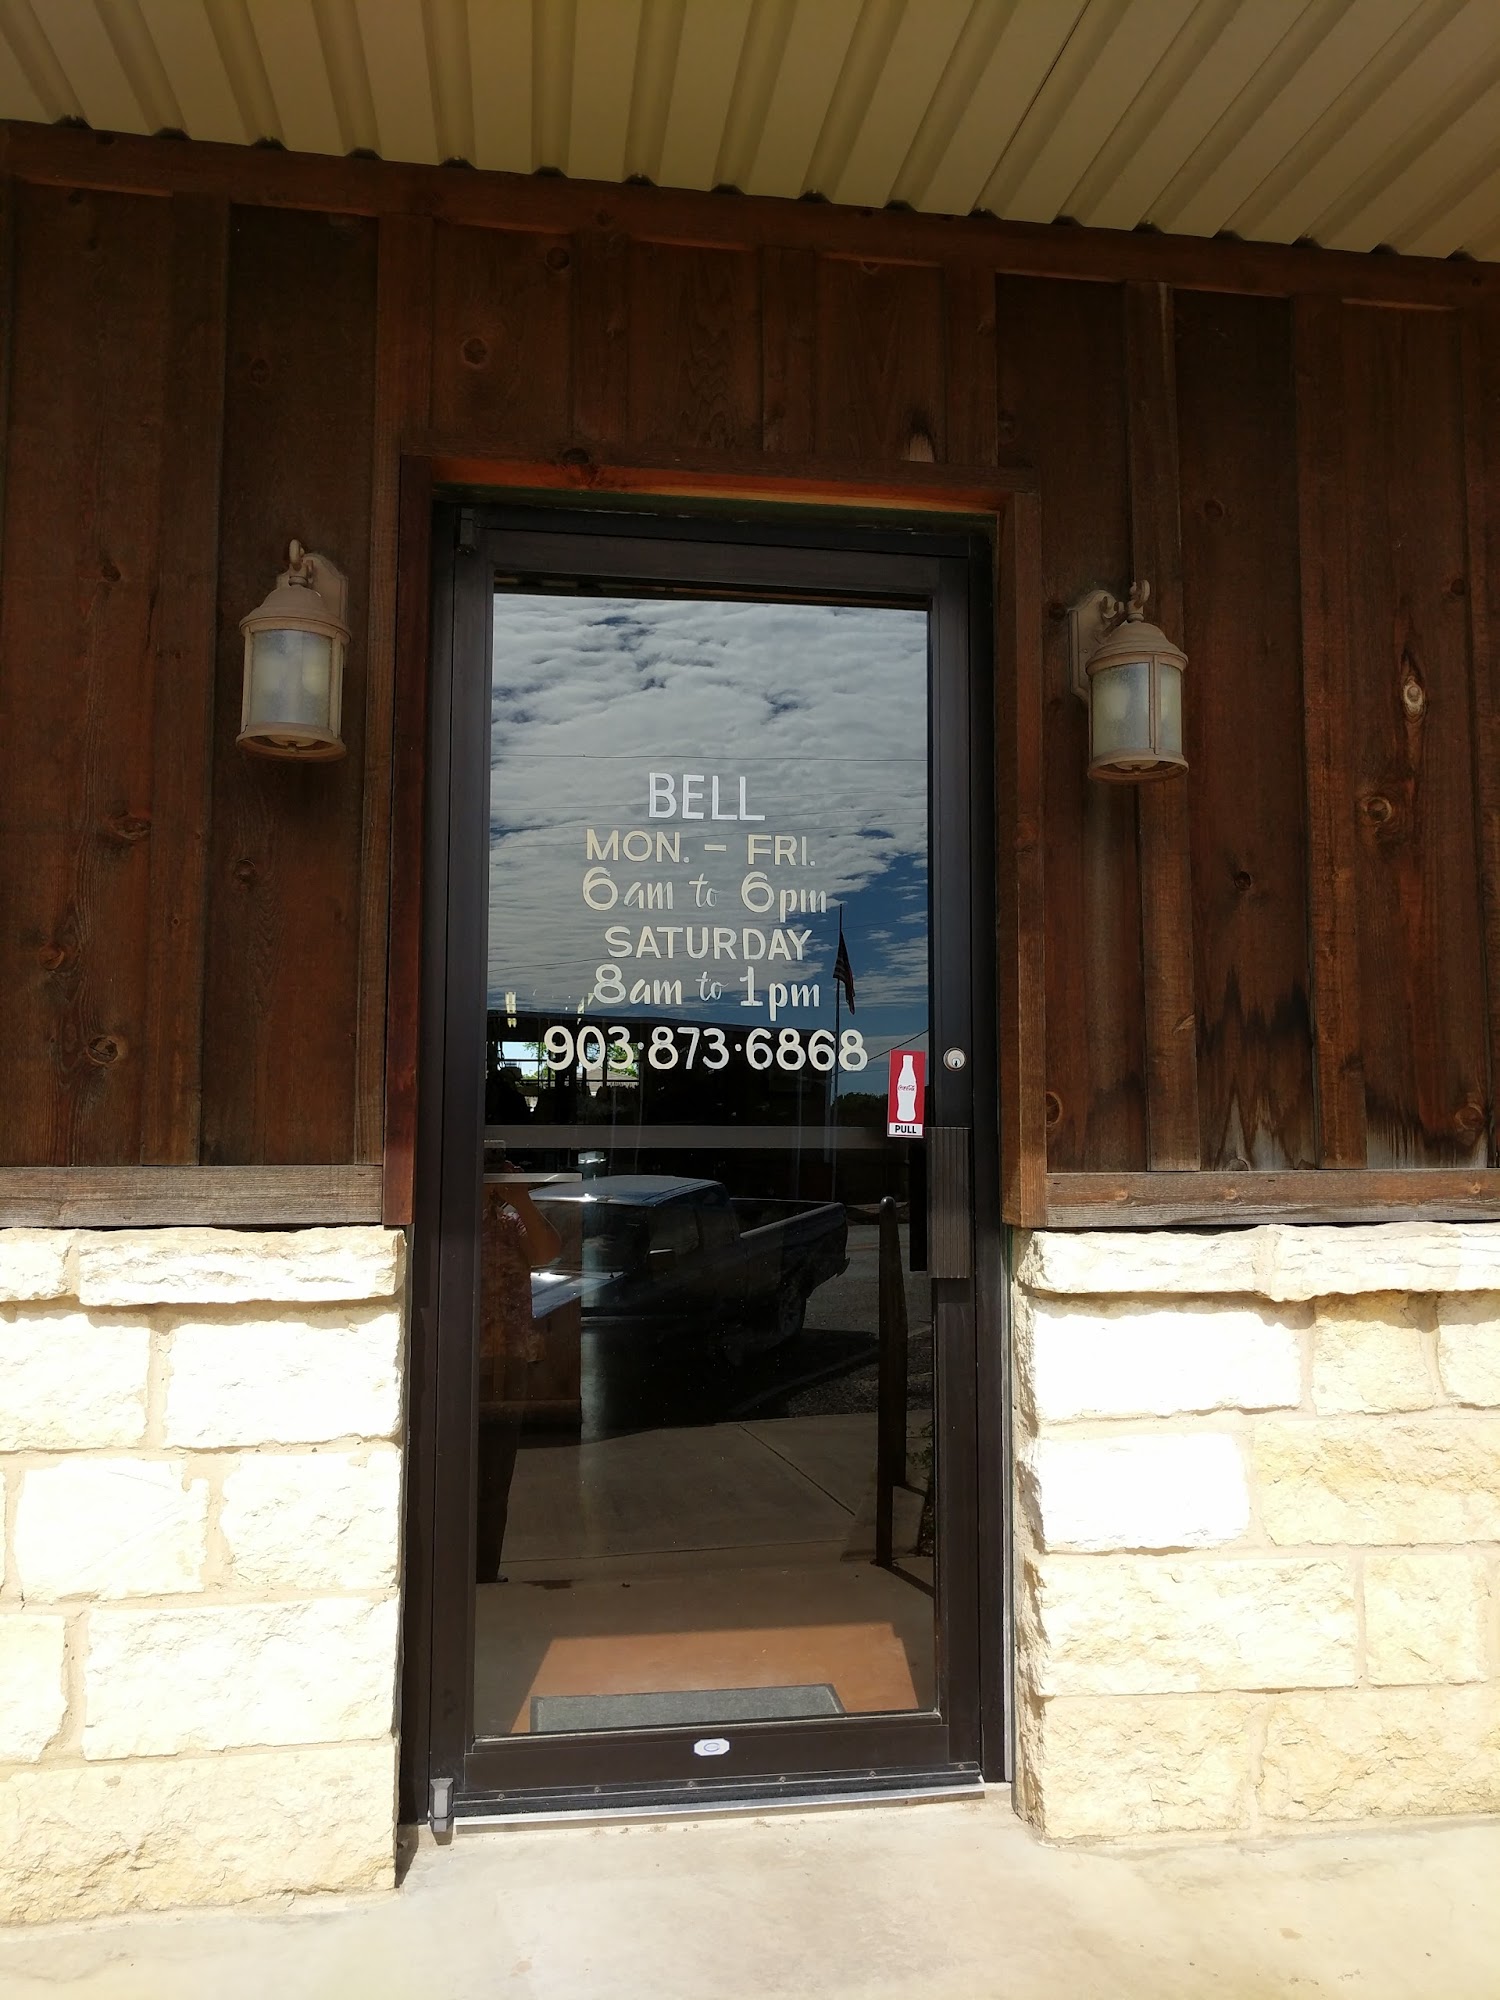 Bell Cleaners 120 S 4th St, Wills Point Texas 75169